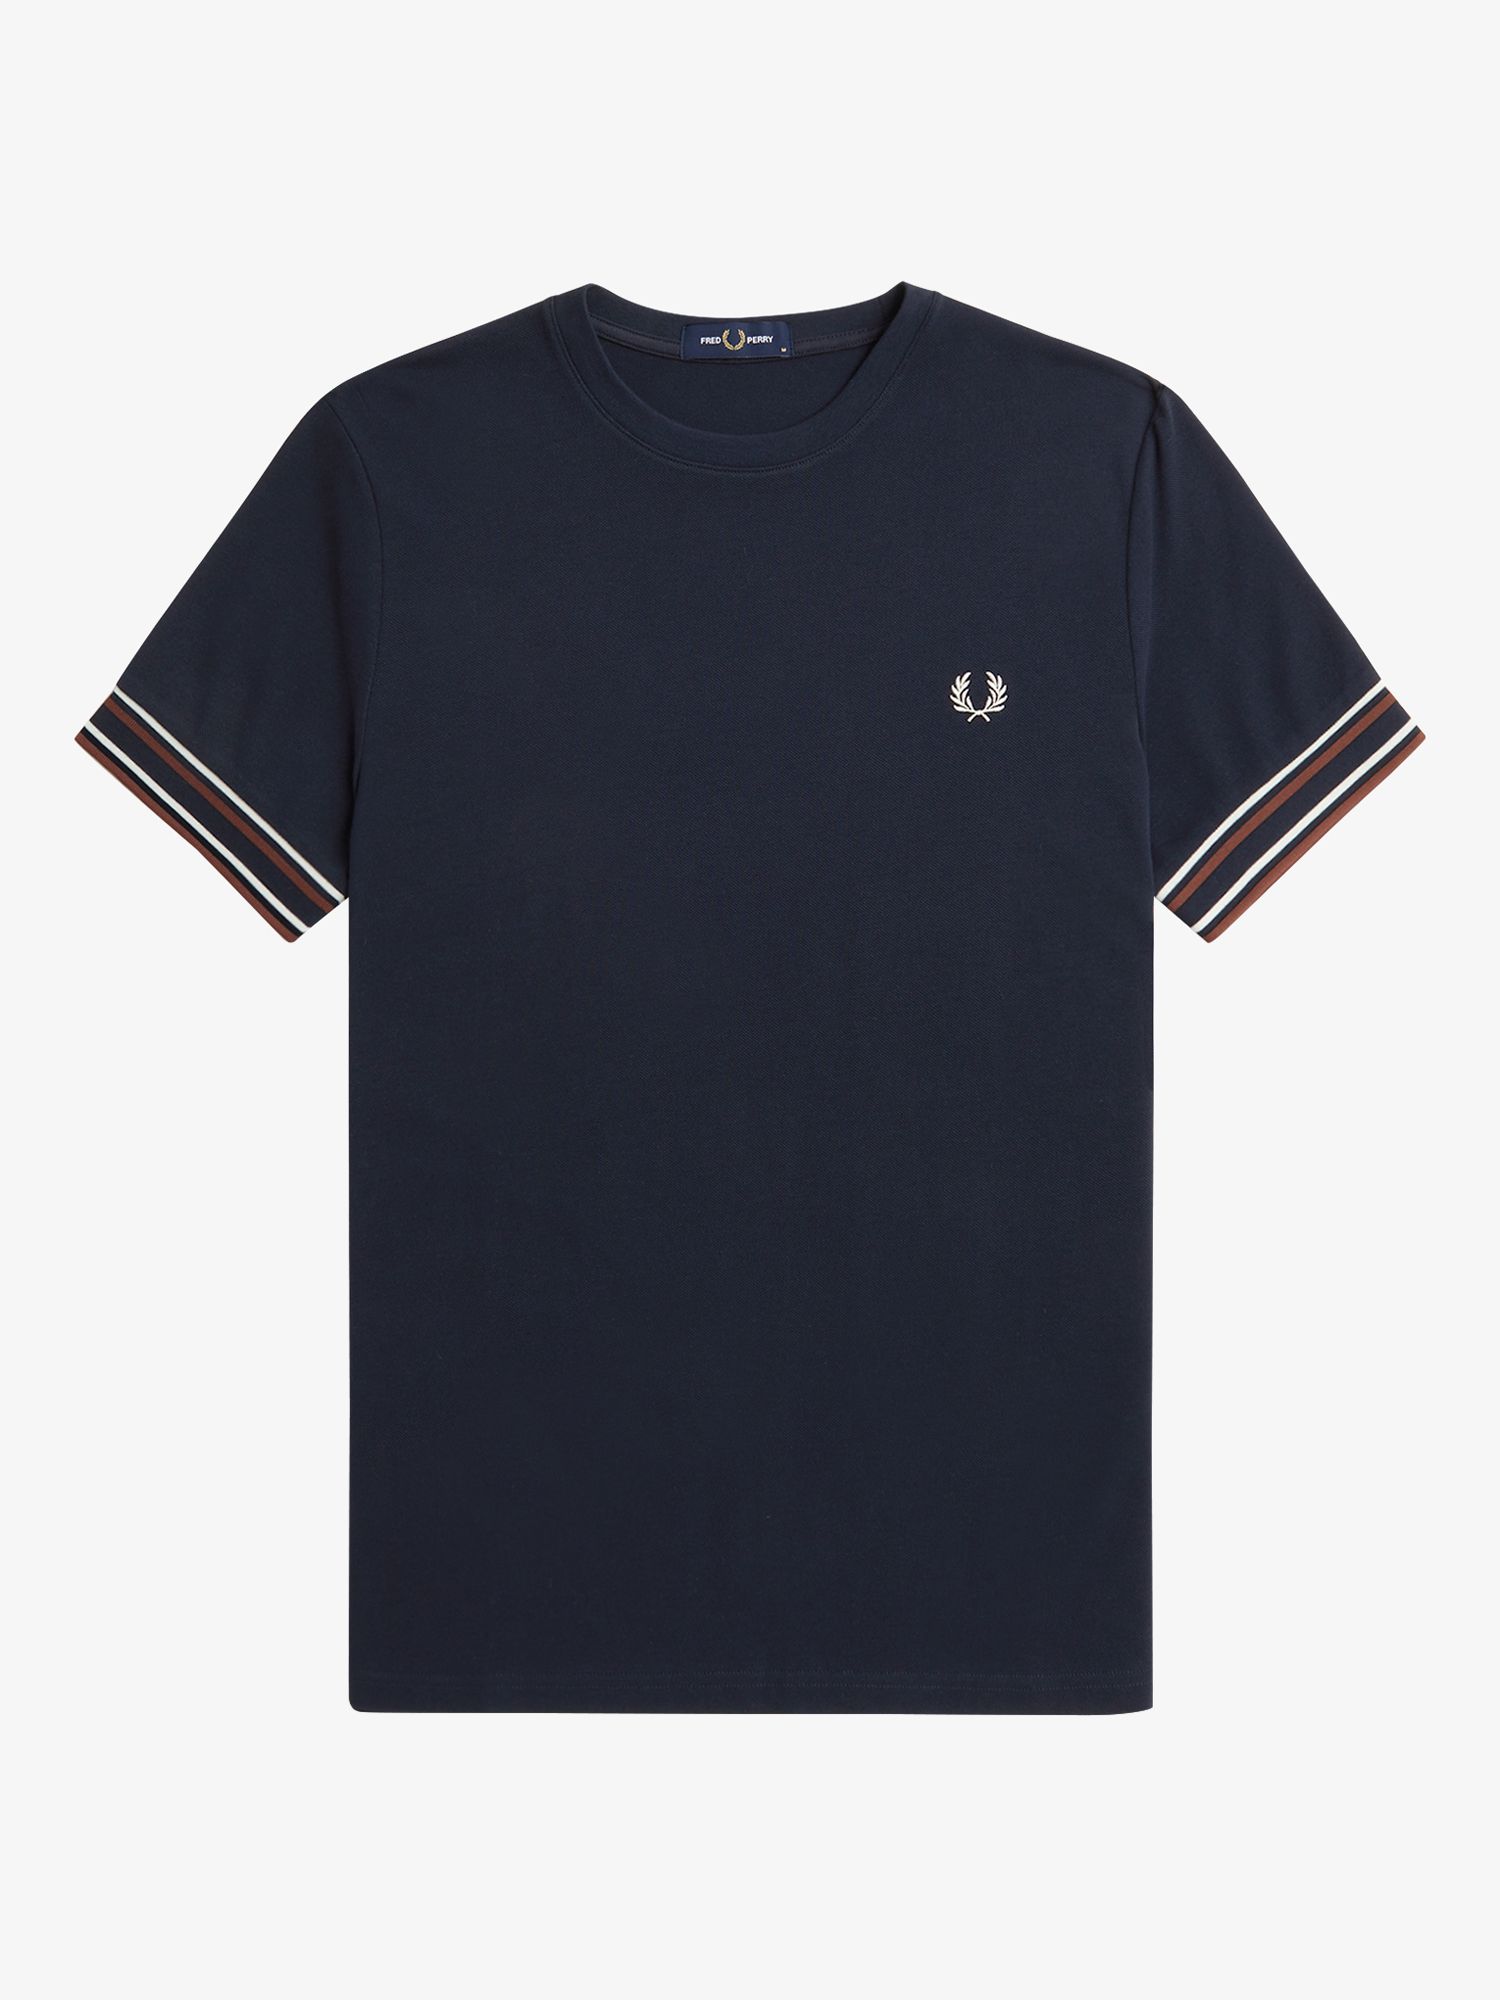 Fred Perry Bold Tipped T-Shirt, Navy at John Lewis & Partners